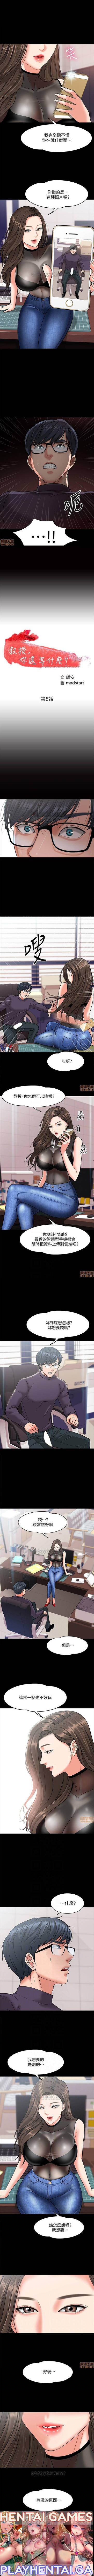 Tgirls PROFESSOR, ARE YOU JUST GOING TO LOOK AT ME? | DESIRE SWAMP | 教授，你還等什麼? Ch. 5 [Chinese] Manhwa Seduction - Page 2